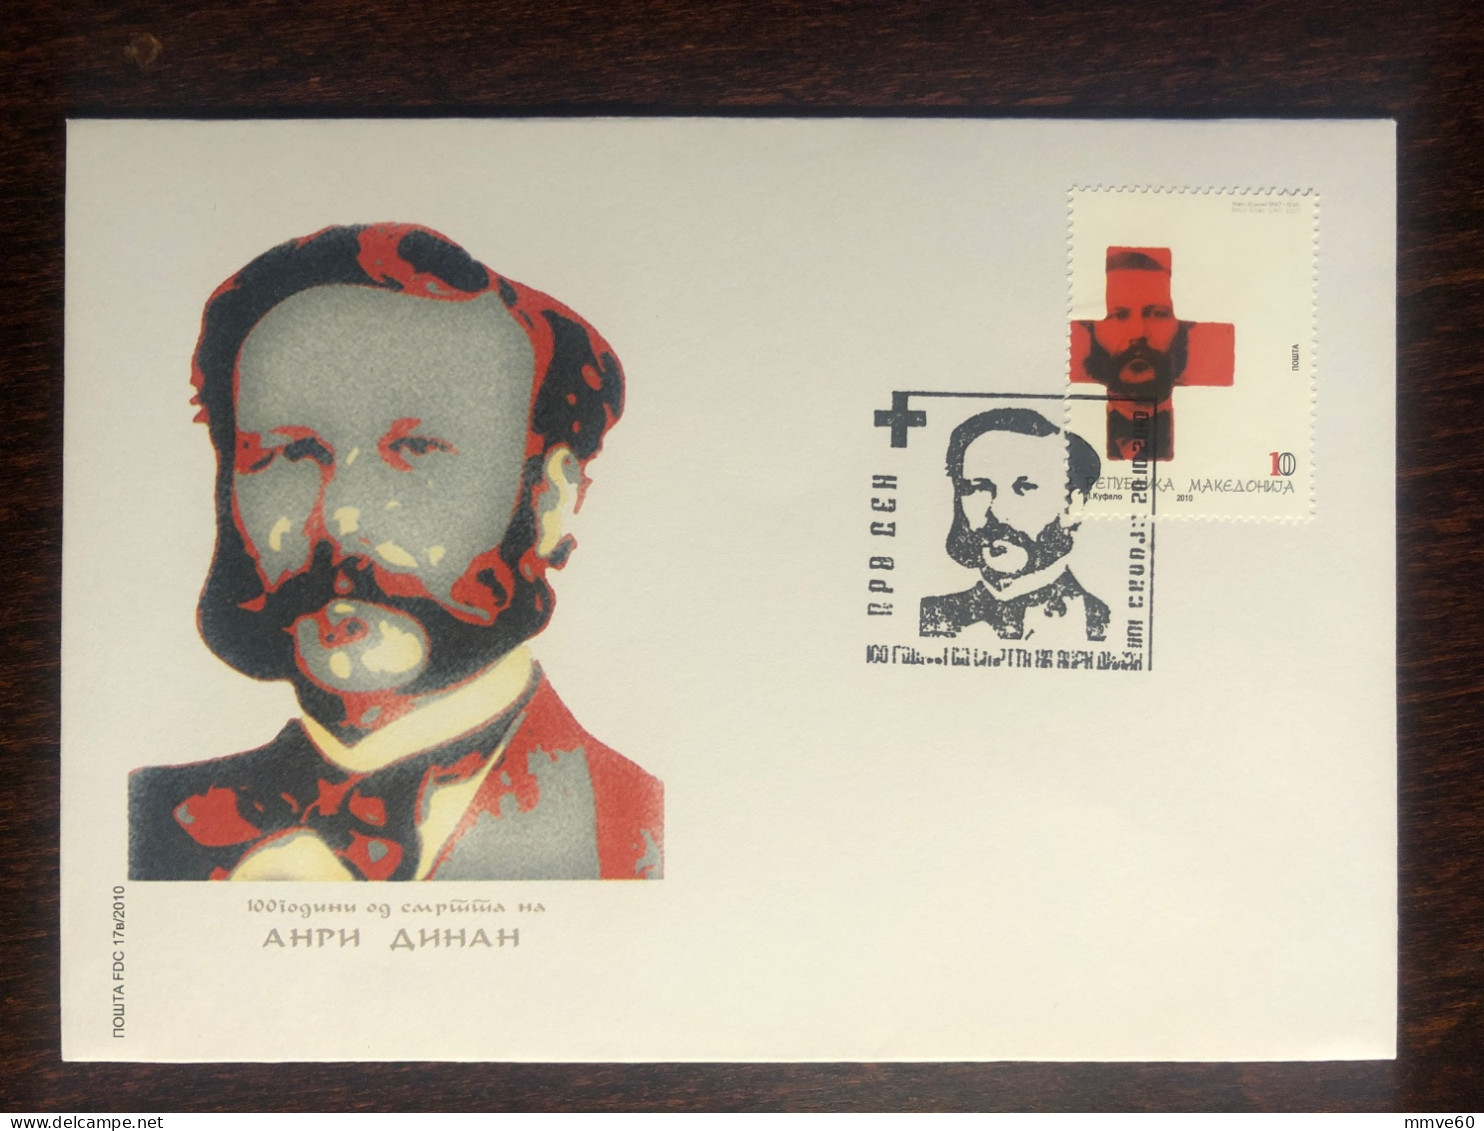 MACEDONIA FDC COVER 2010 YEAR  RED CROSS DUNANT HEALTH MEDICINE STAMPS - Macédoine Du Nord